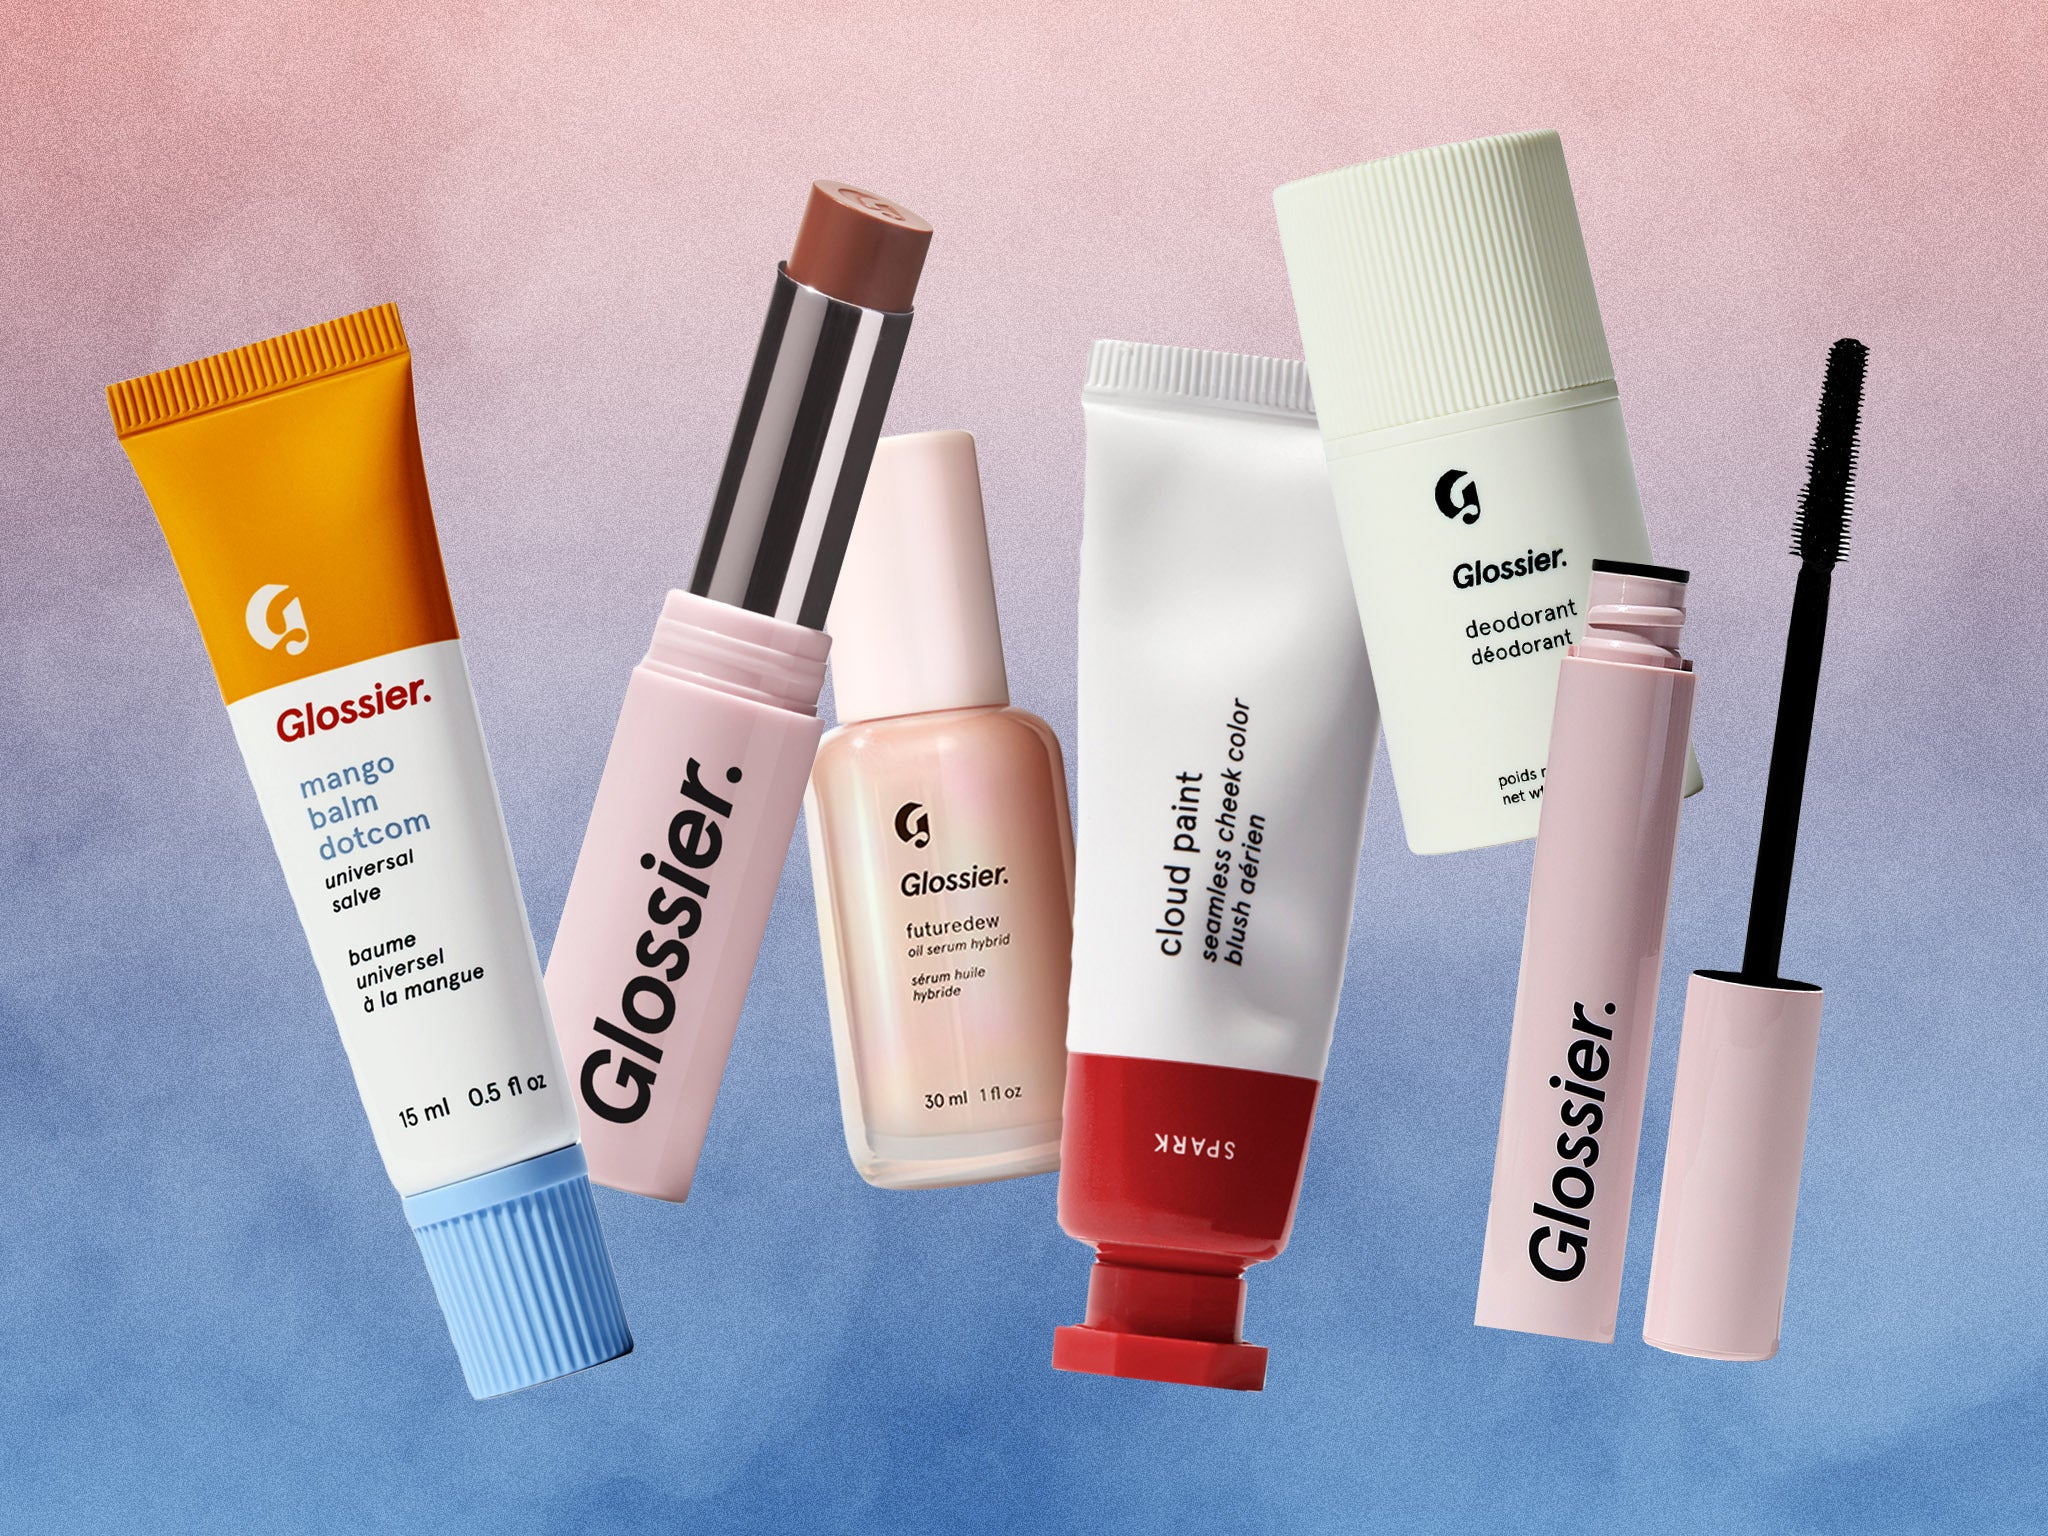 The buzzy, beauty editor-approved brand needs no introduction